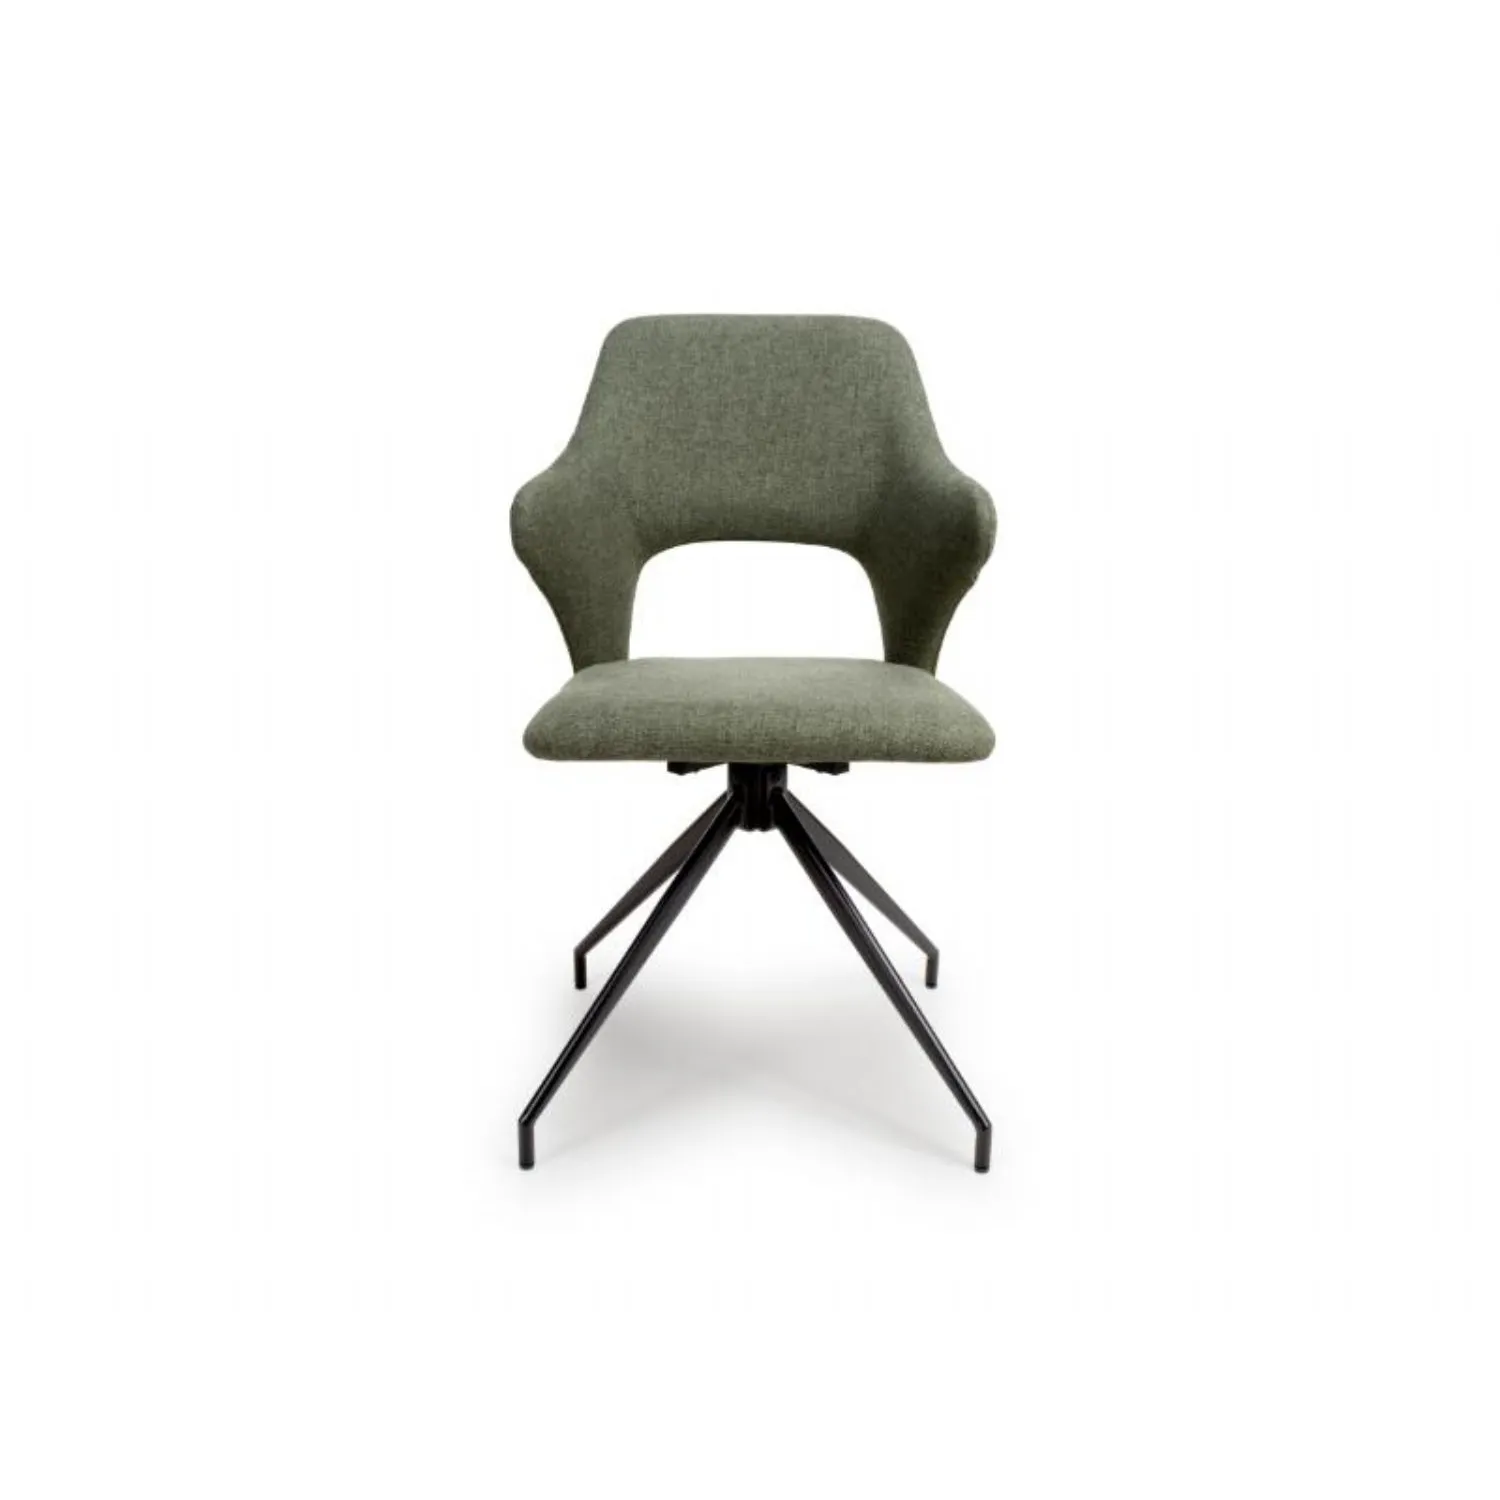 Sage Green Fabric Upholstered Dining Chair Black Metal Legs